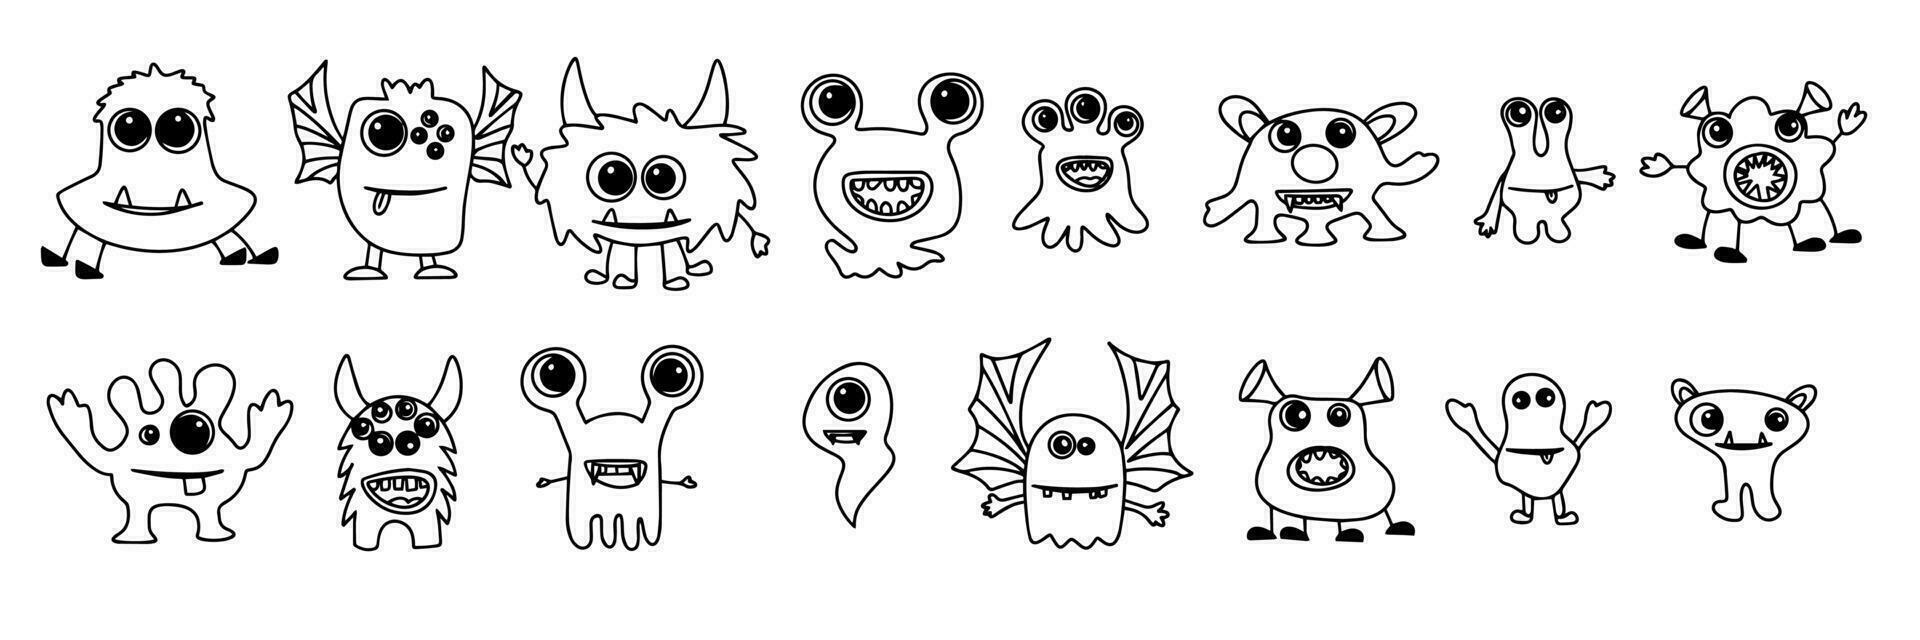 Big collection of monsters in doodle style. Hand drawn big set of Halloween monsters. Vector illustration